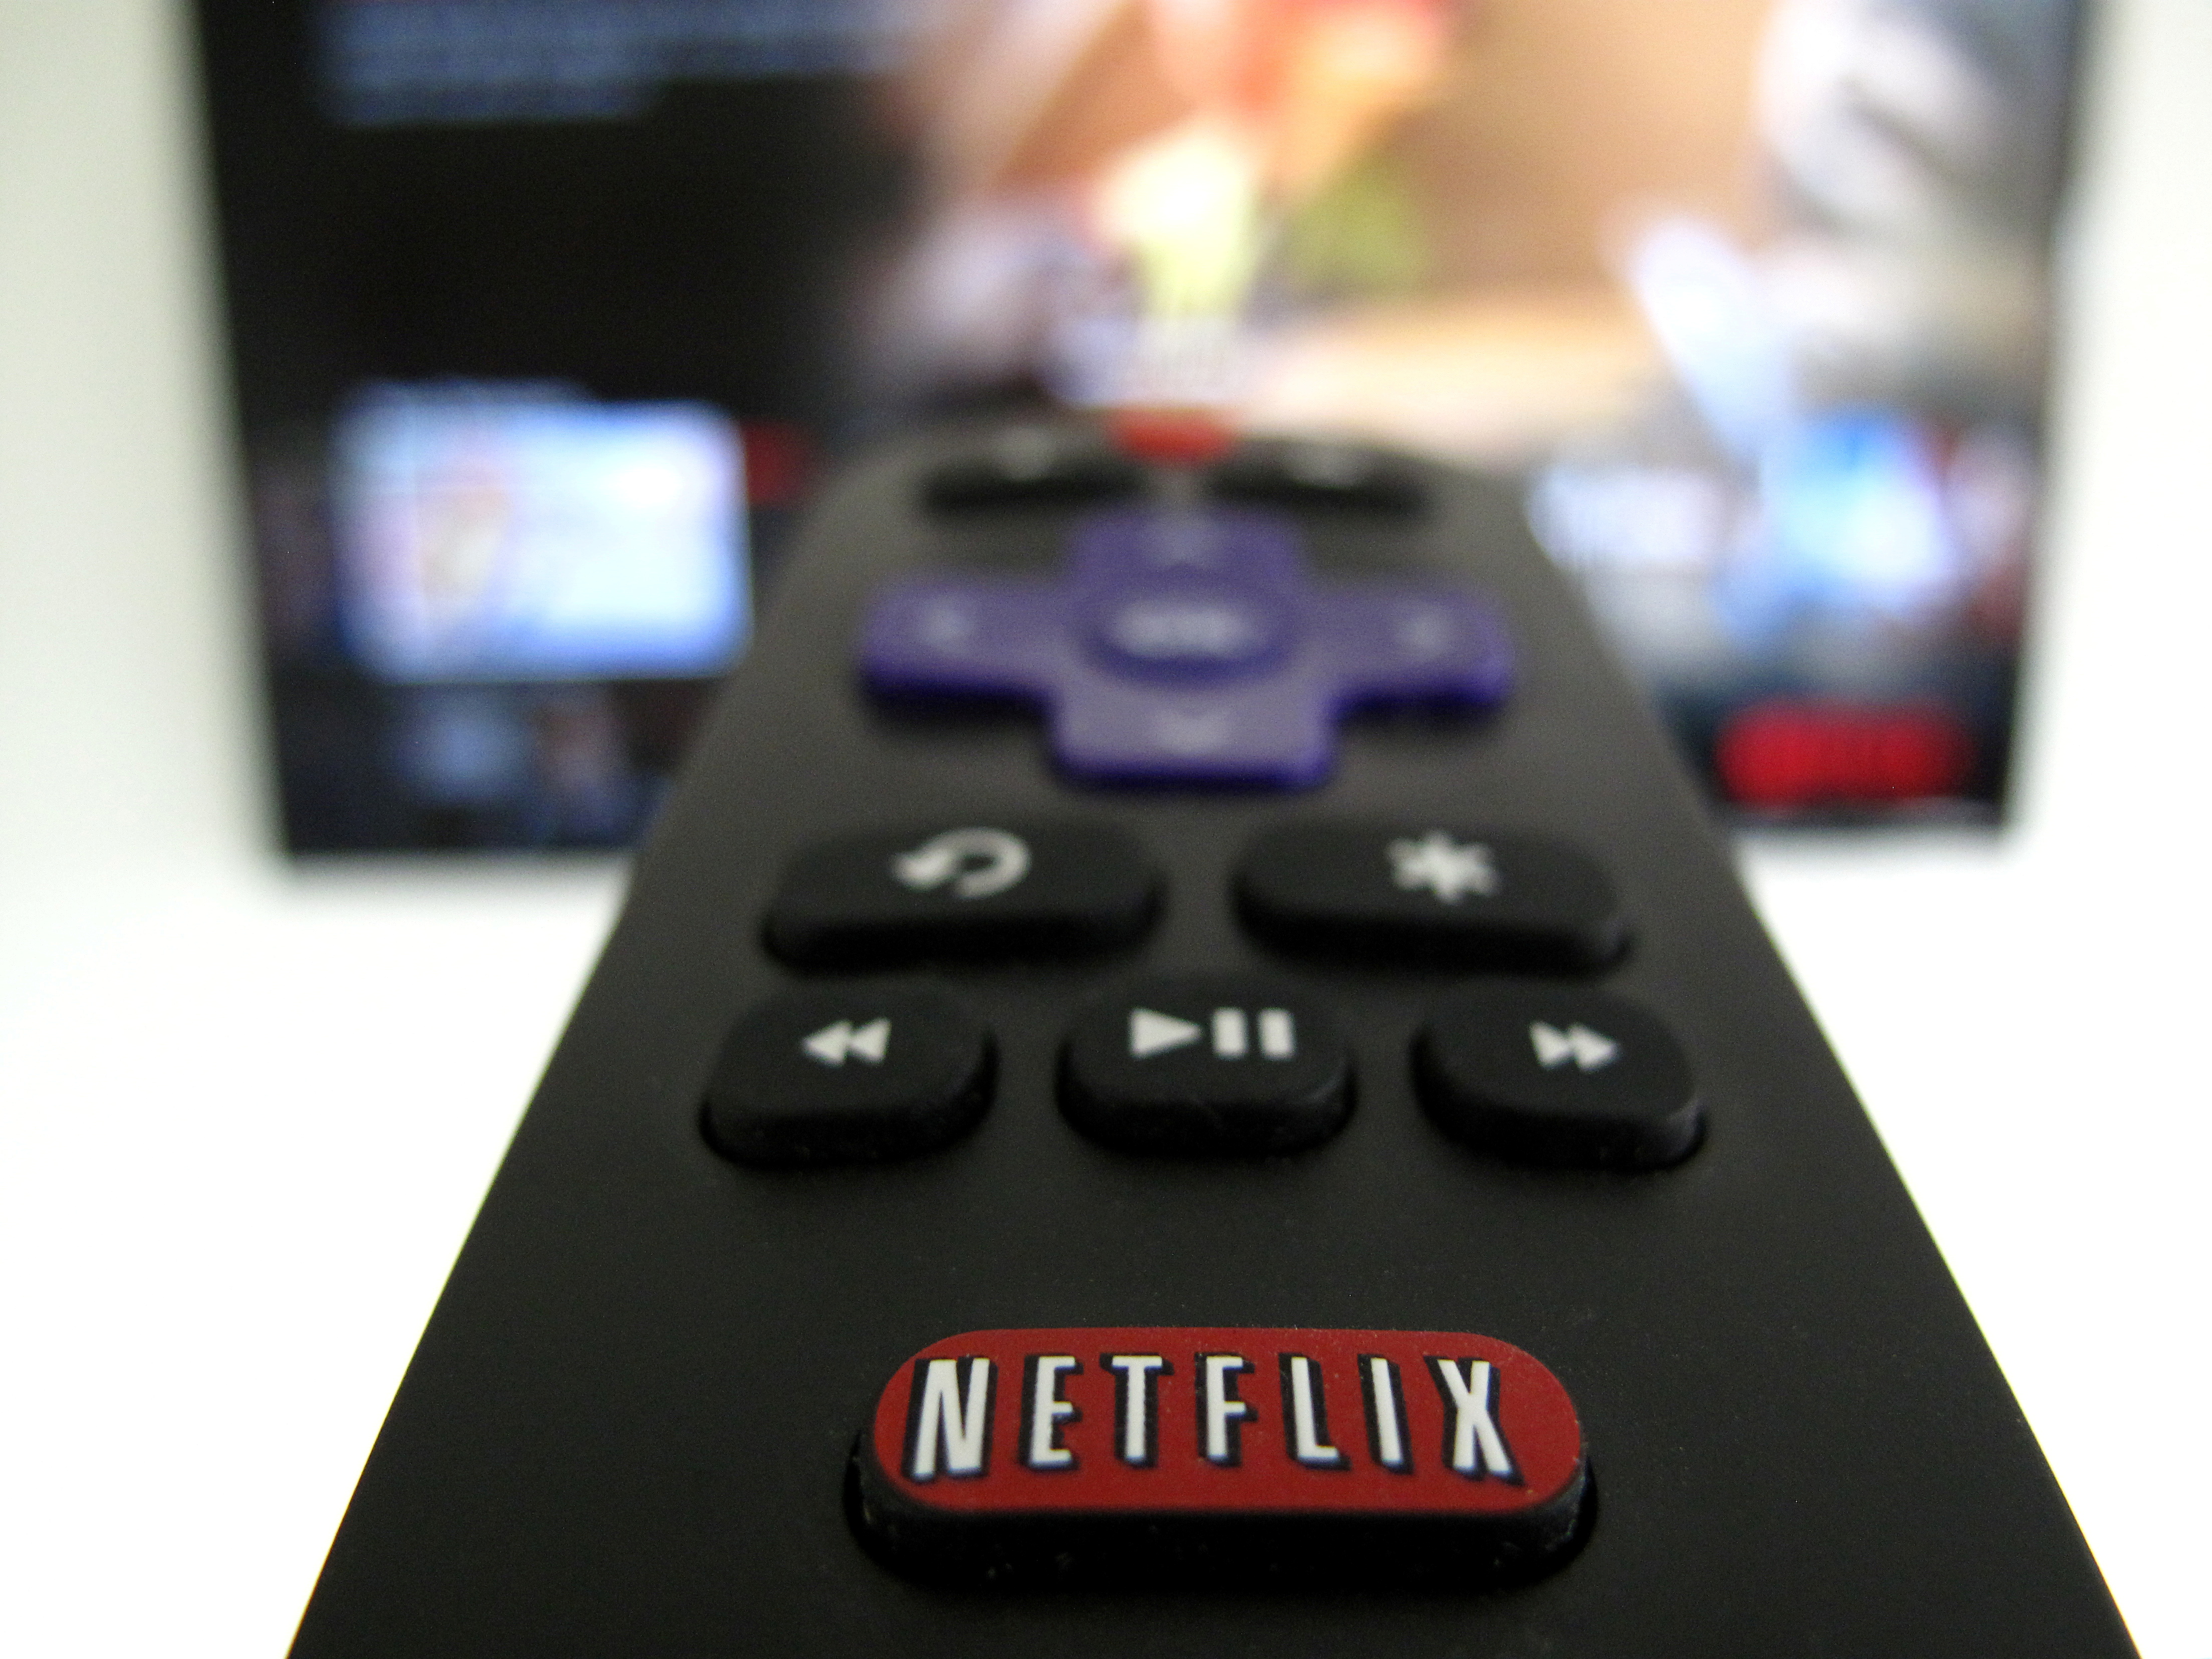 The Netflix logo is pictured on a television remote in this illustration photograph taken in Encinitas, California